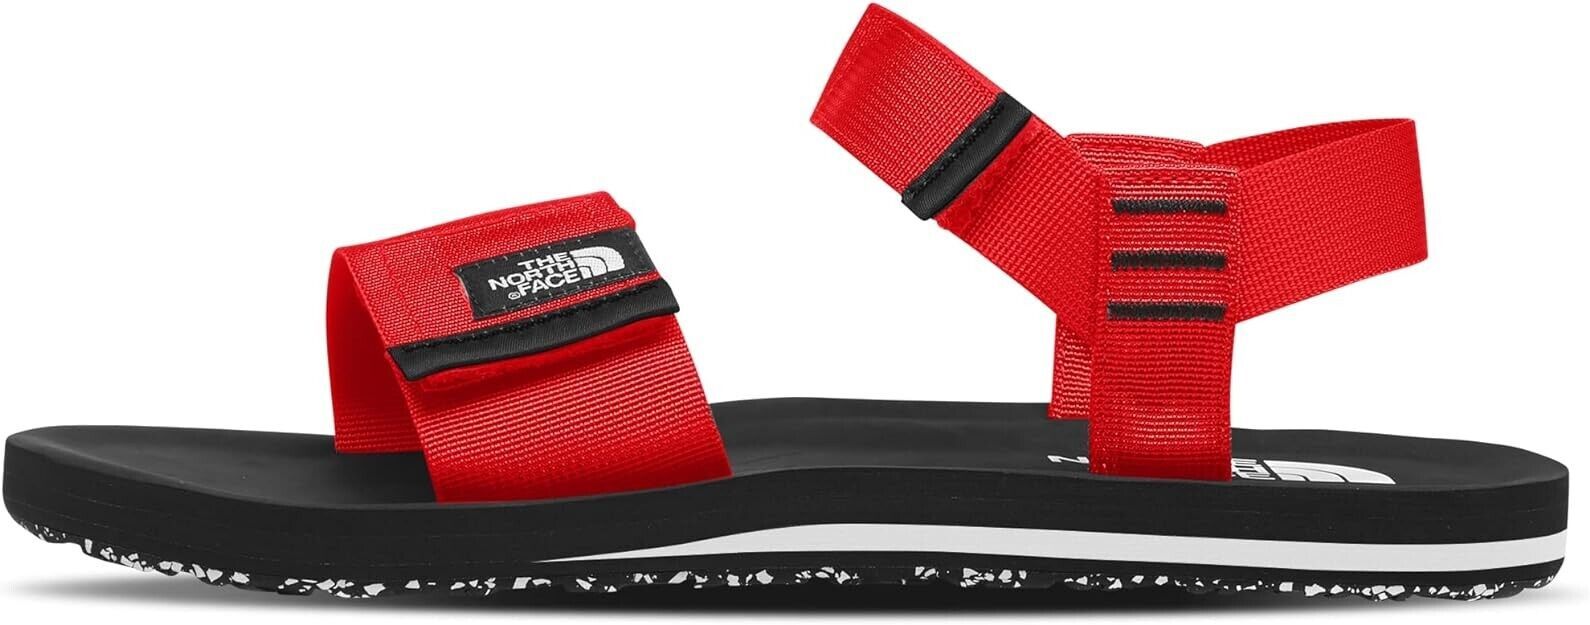 THE NORTH FACE Skeena Sandals Mens 10 Red Black NEW - £35.50 GBP